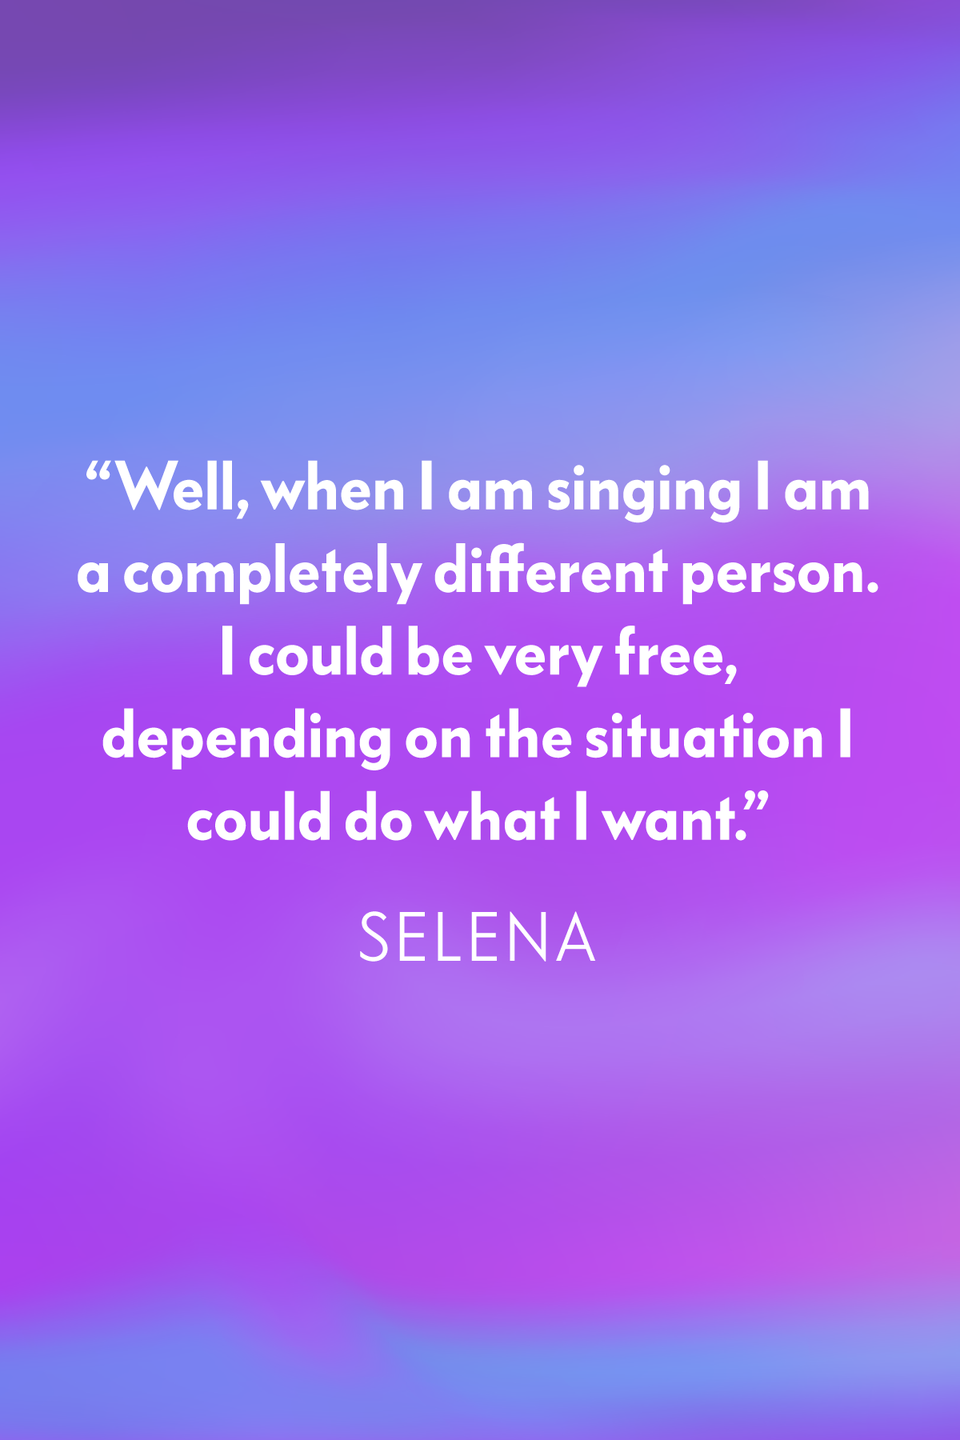 On how music frees her